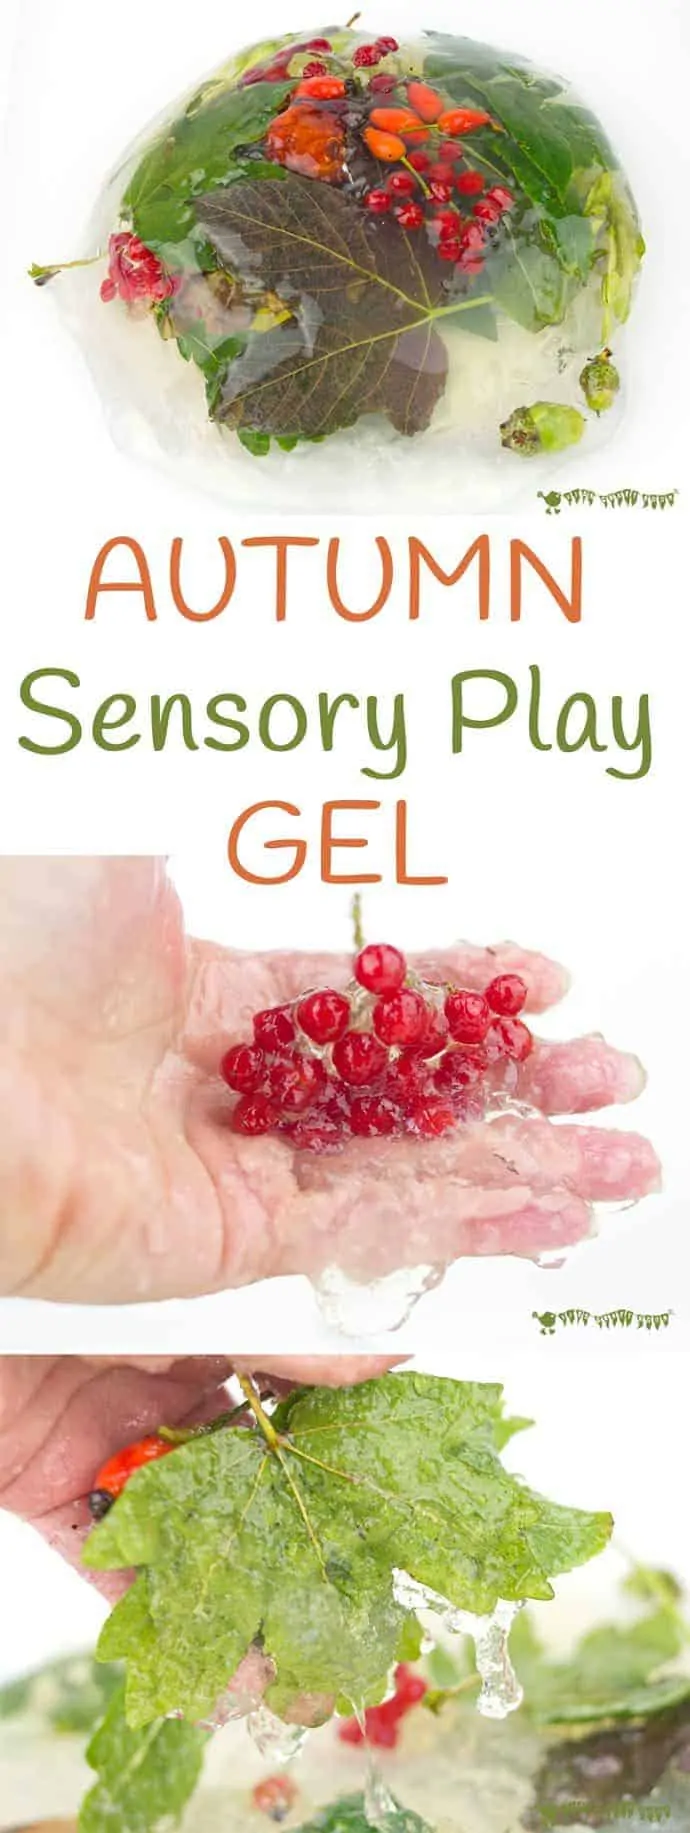 Autumn Sensory Play Gel is an irresistible hands-on play idea bringing the wonders of Nature into a squishy, squashy textural delight kids LOVE to explore. Sensory play at its best!